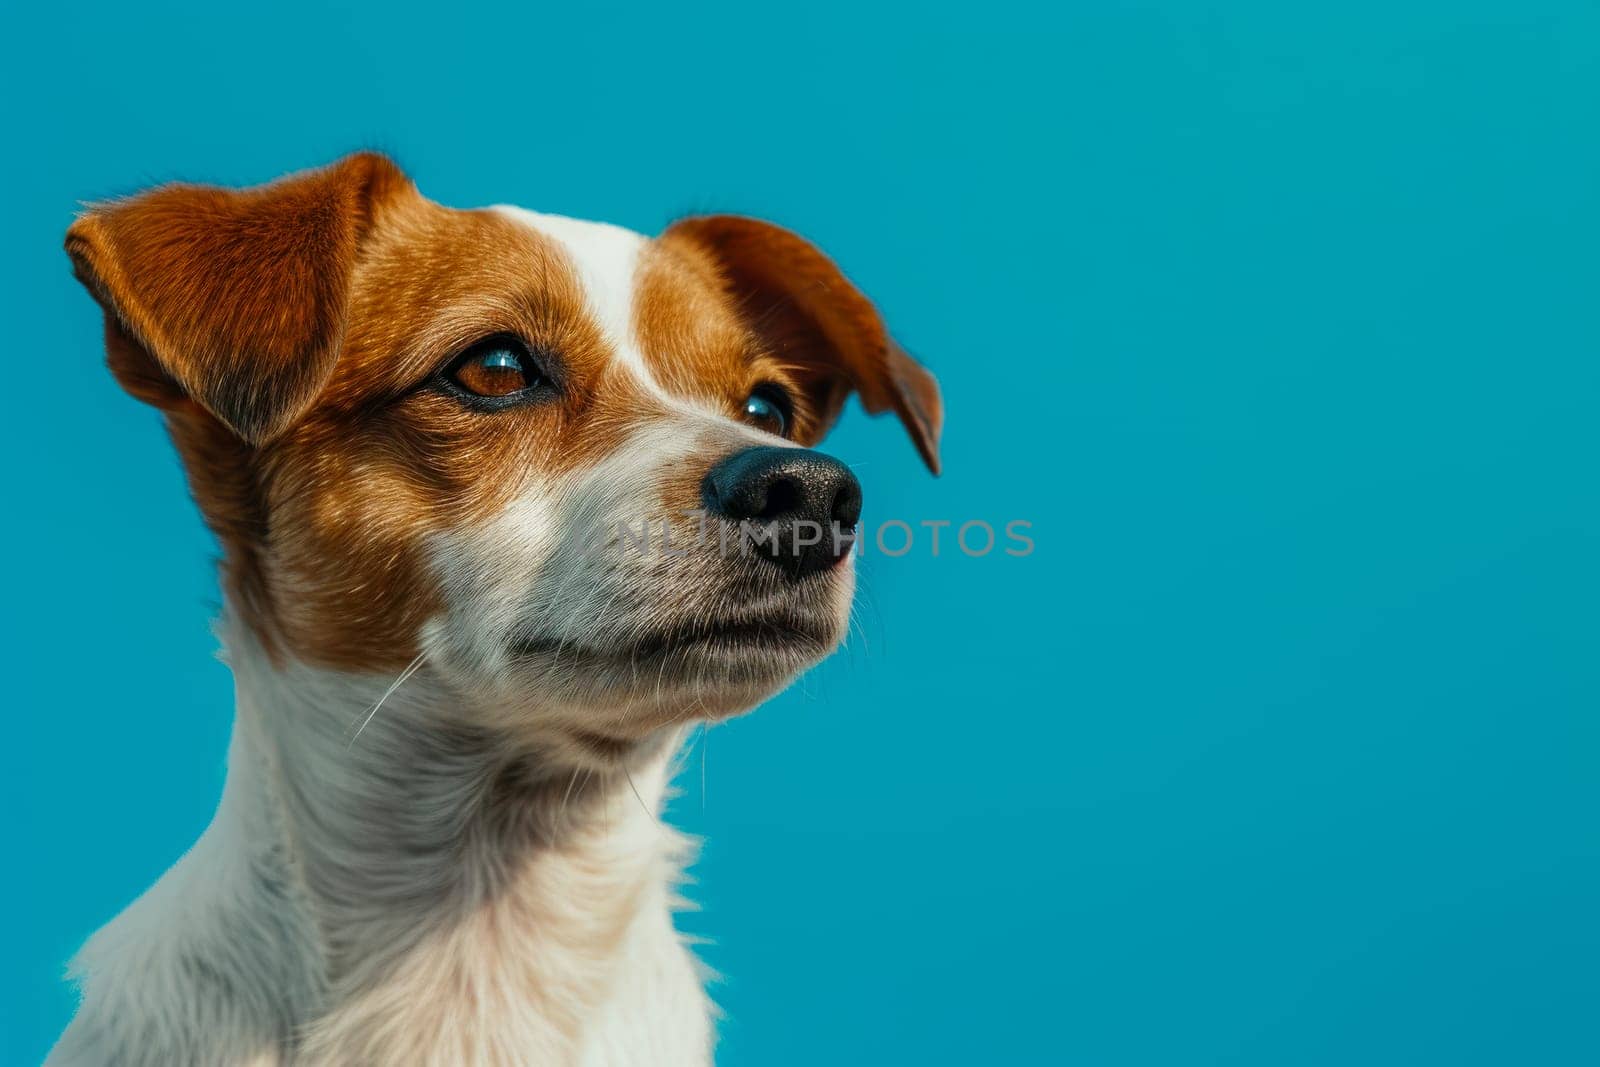 A close up photo showcasing a dog with various colors and textures in front of a solid blue background.